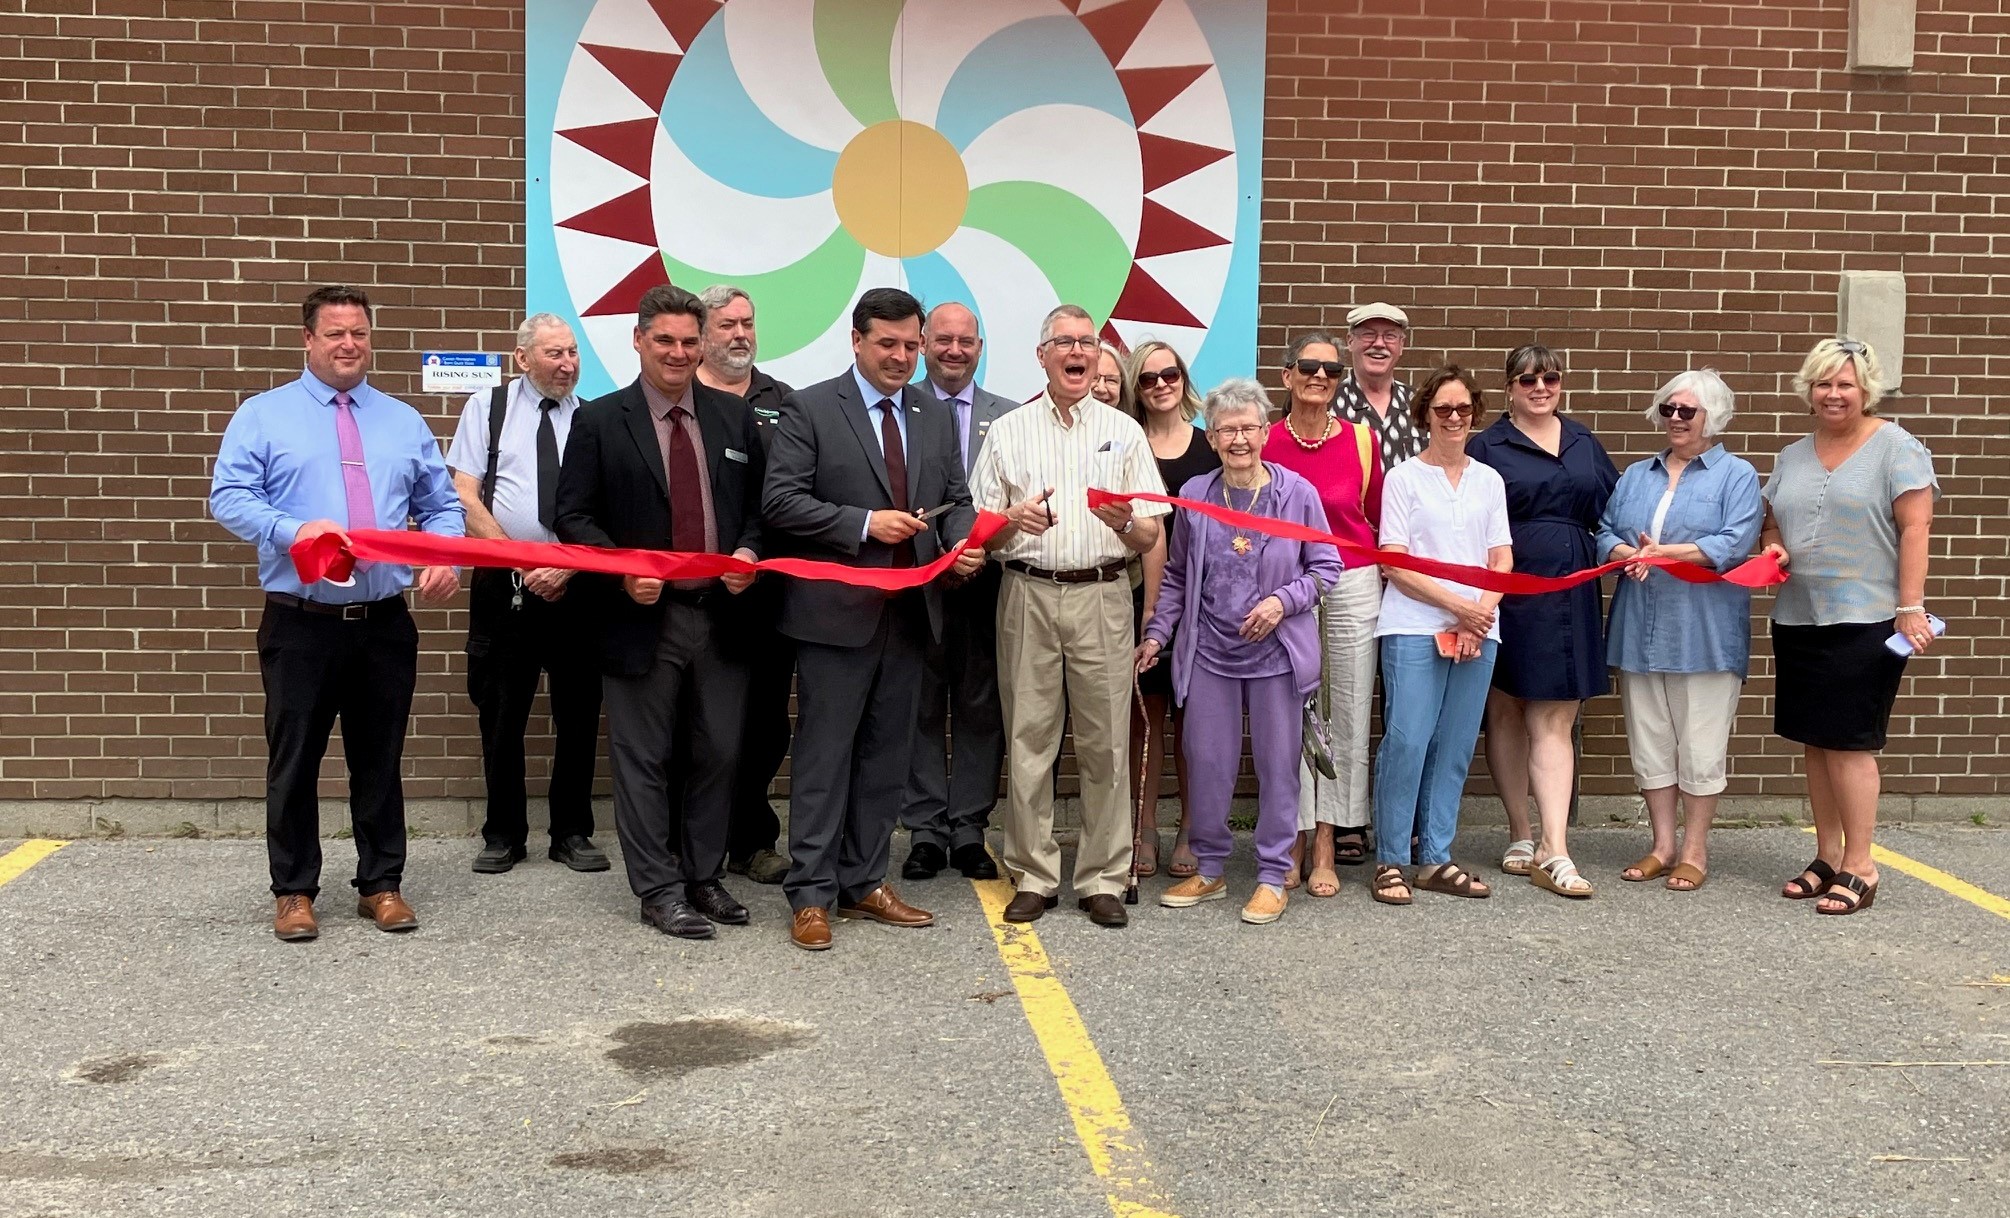 Council and members of the Barn Quilt Committee cutting a ribbon on the barn quilt